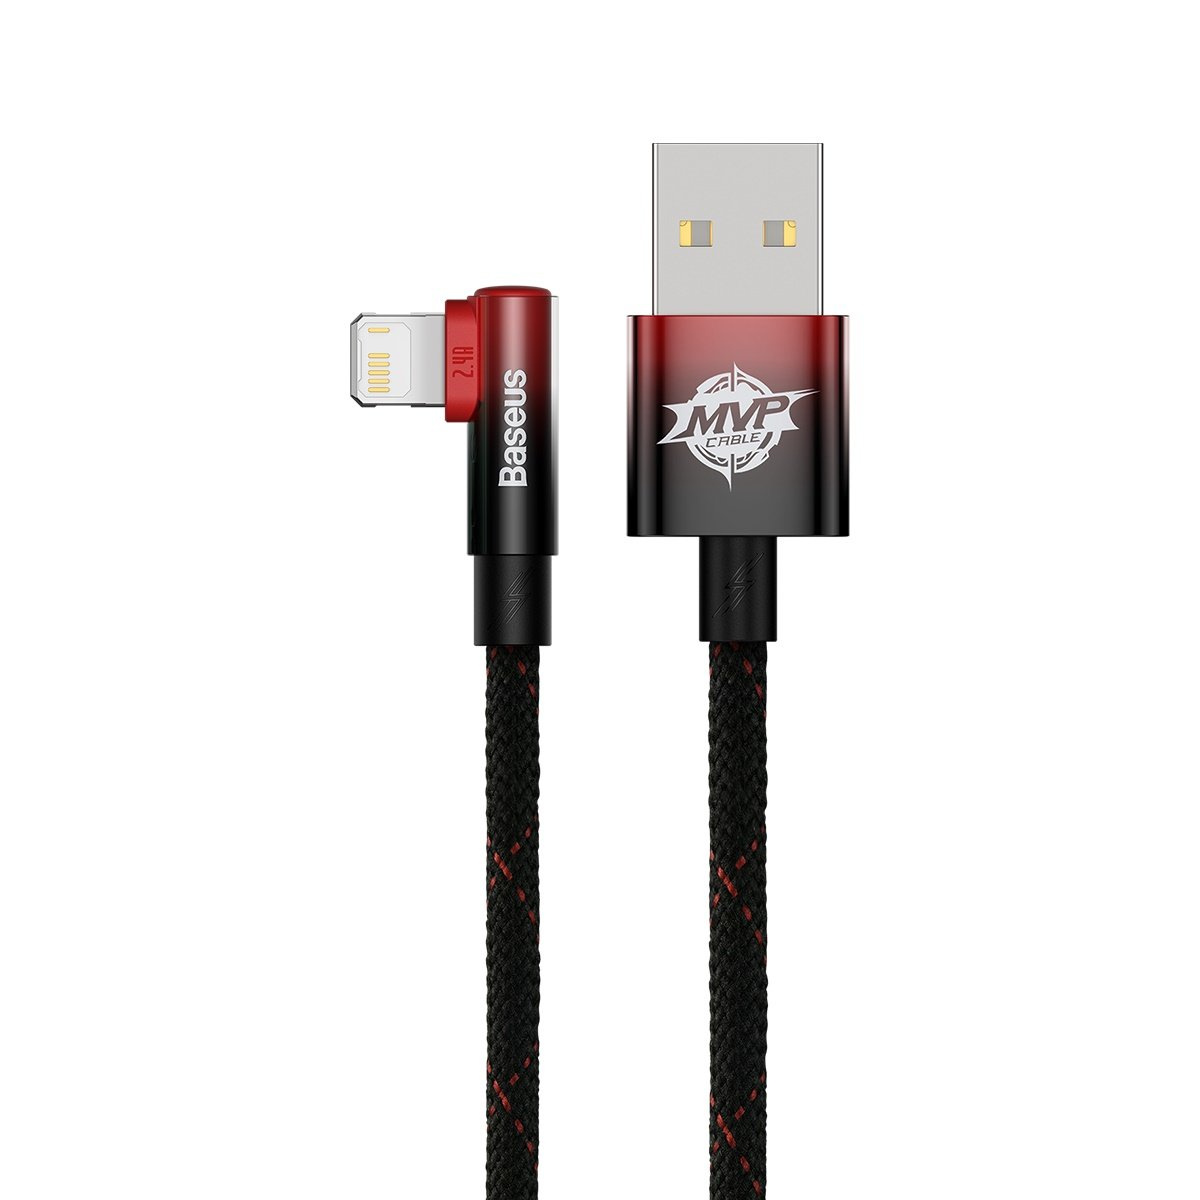 Baseus MVP 2 Elbow USB-A - Lightning angle cable 1m 2.4A red